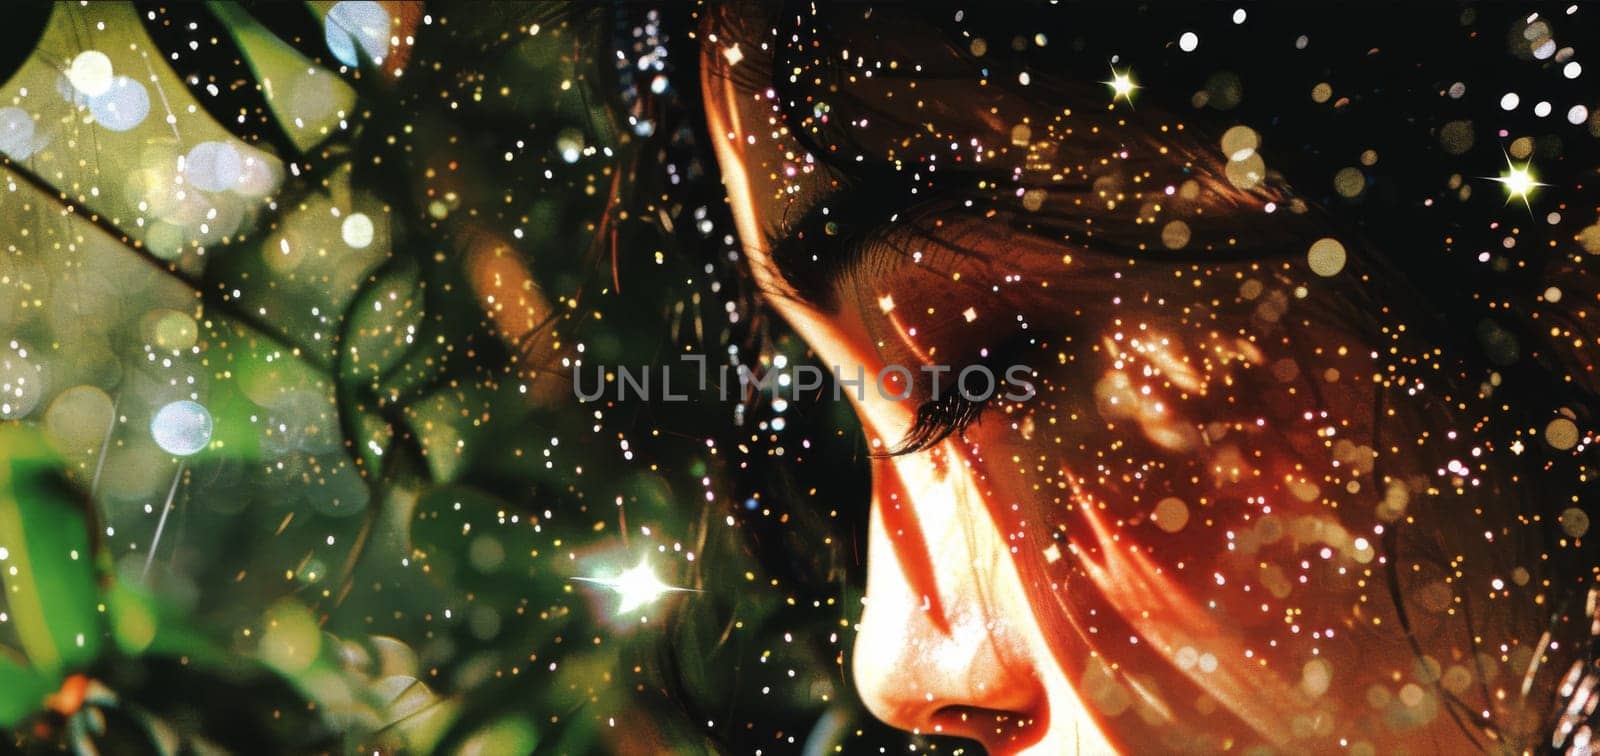 A woman with her eyes closed and a starry background